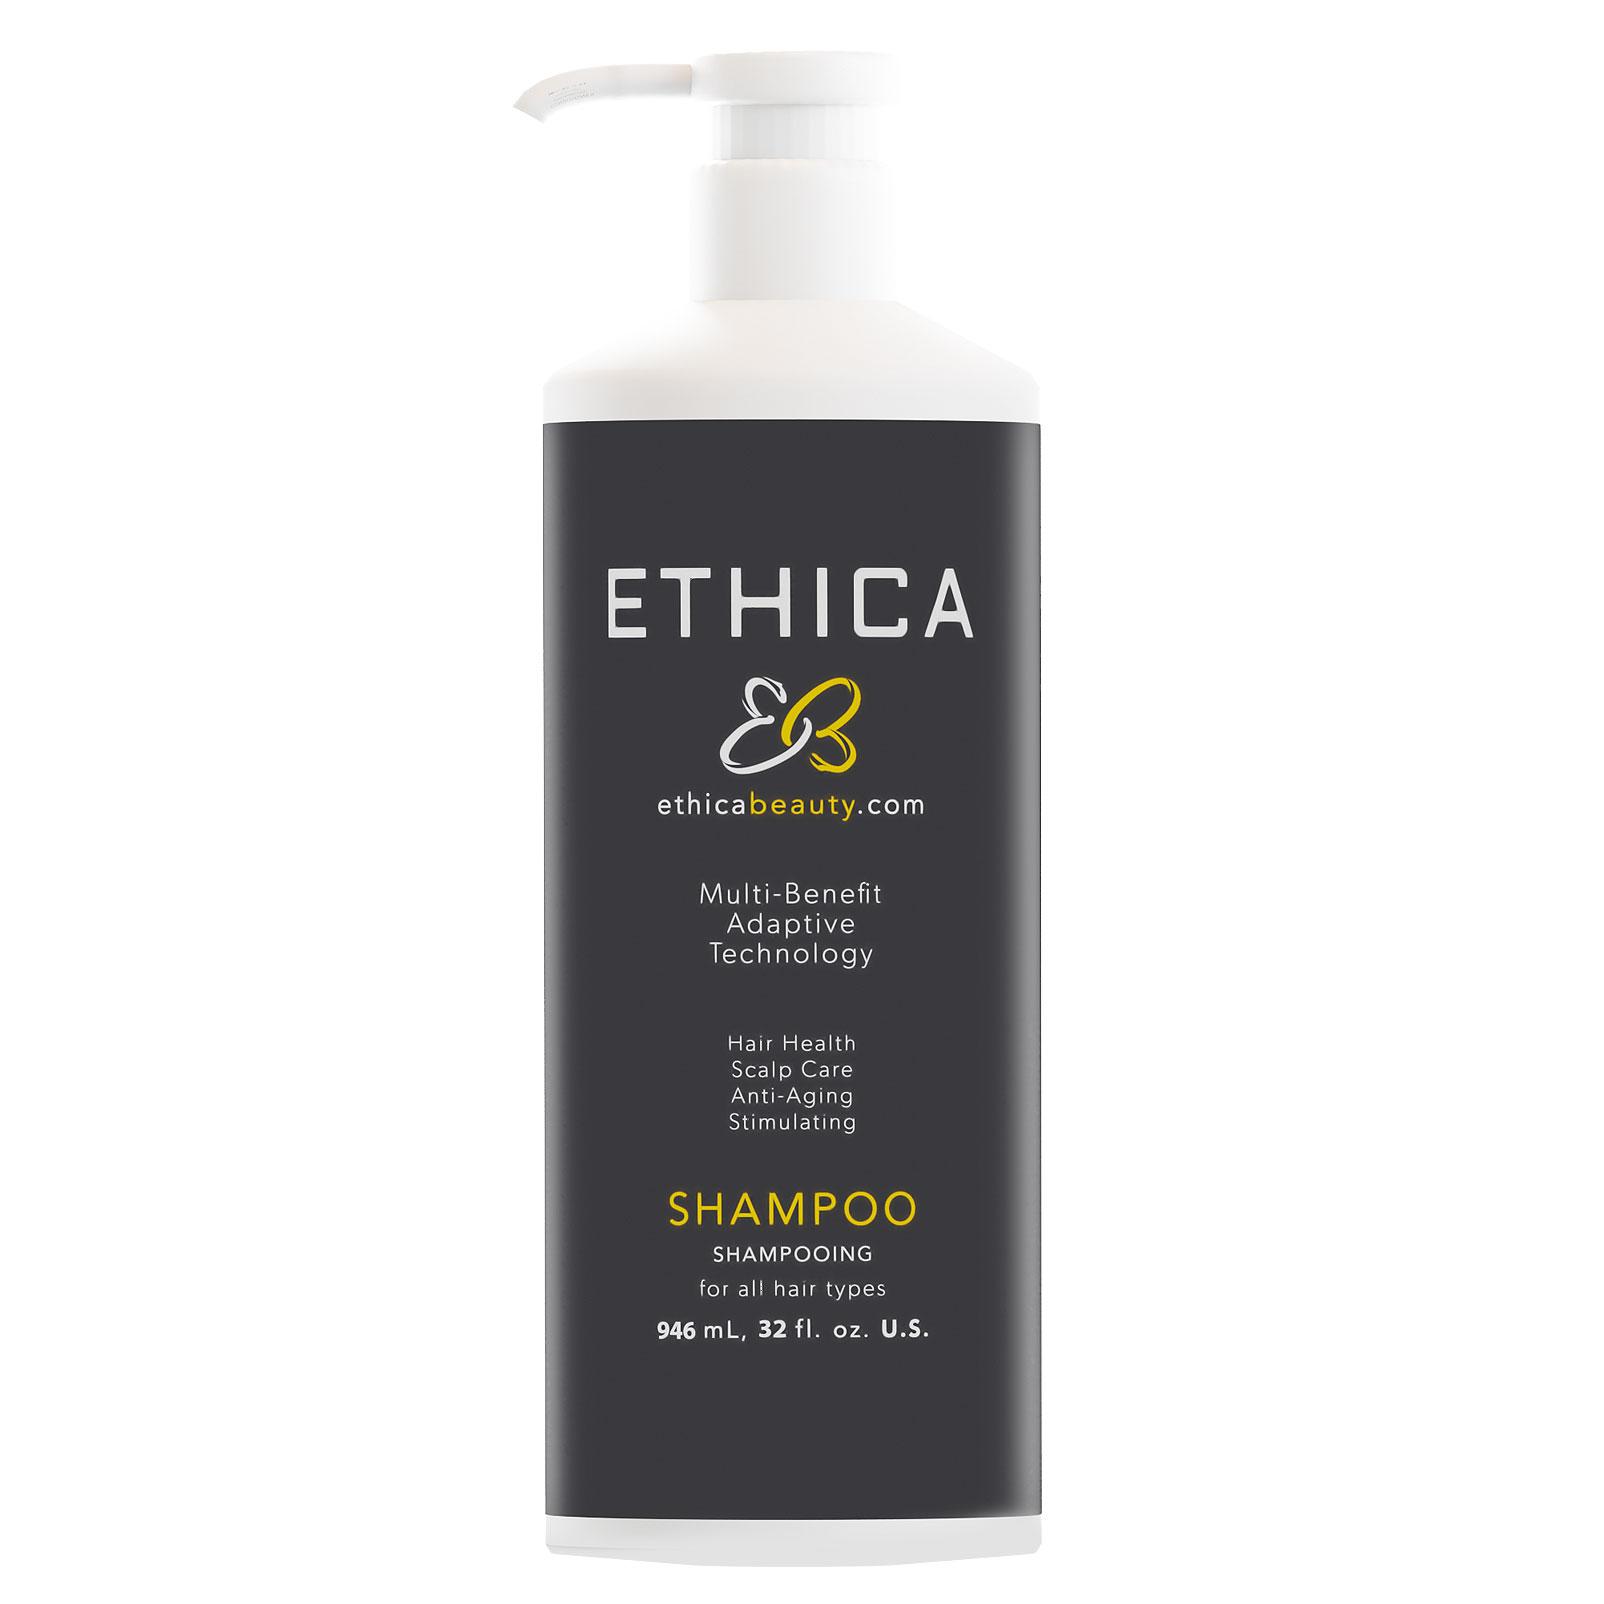 Ethica Anti-Aging Daily Shampoo